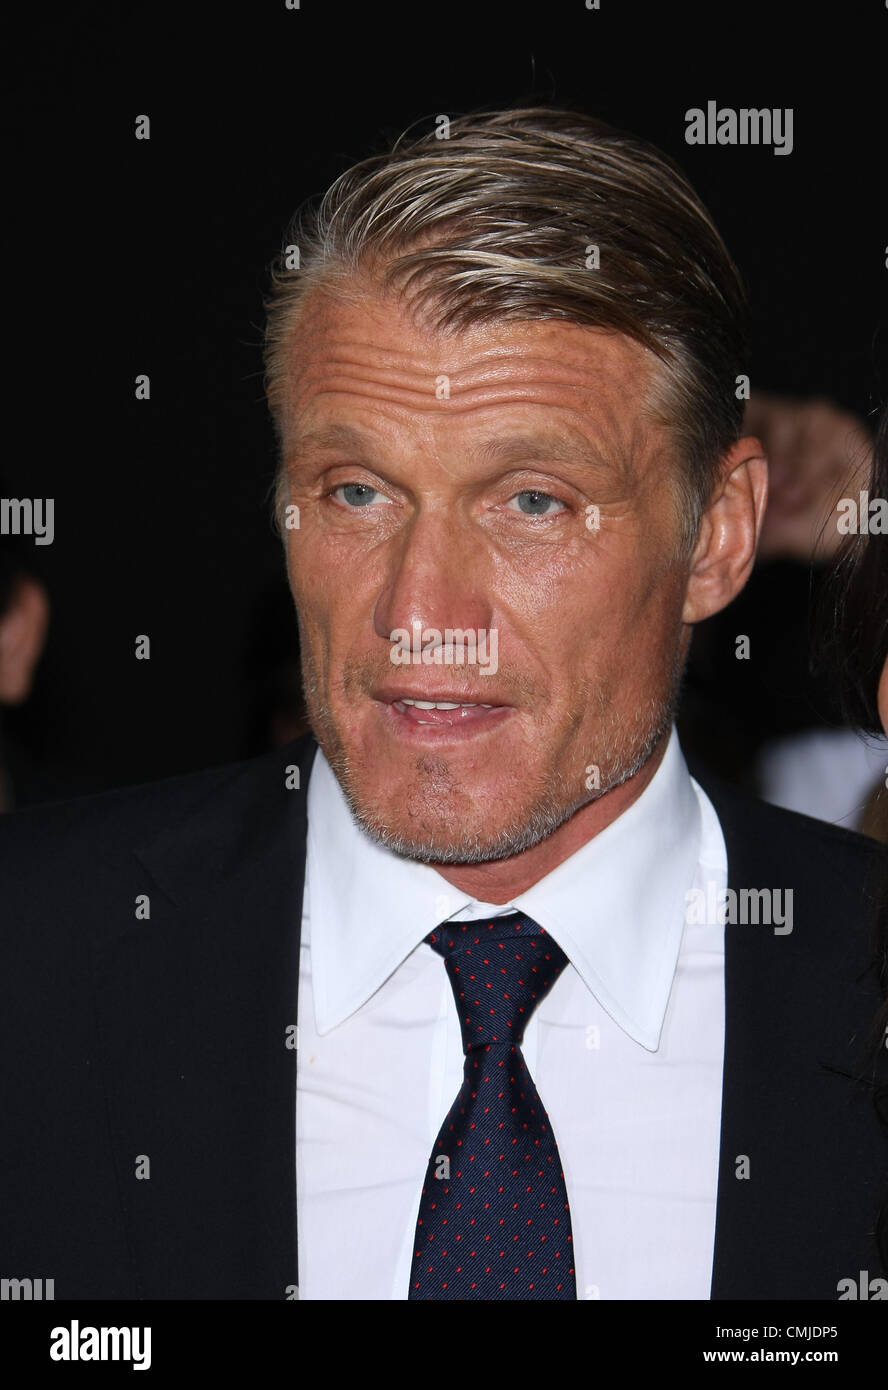 DOLPH LUNDGREN EXPENDABLES 2. WORLD PREMIERE HOLLYWOOD LOS ANGELES CALIFORNIA USA 15 August 2012 Stock Photo